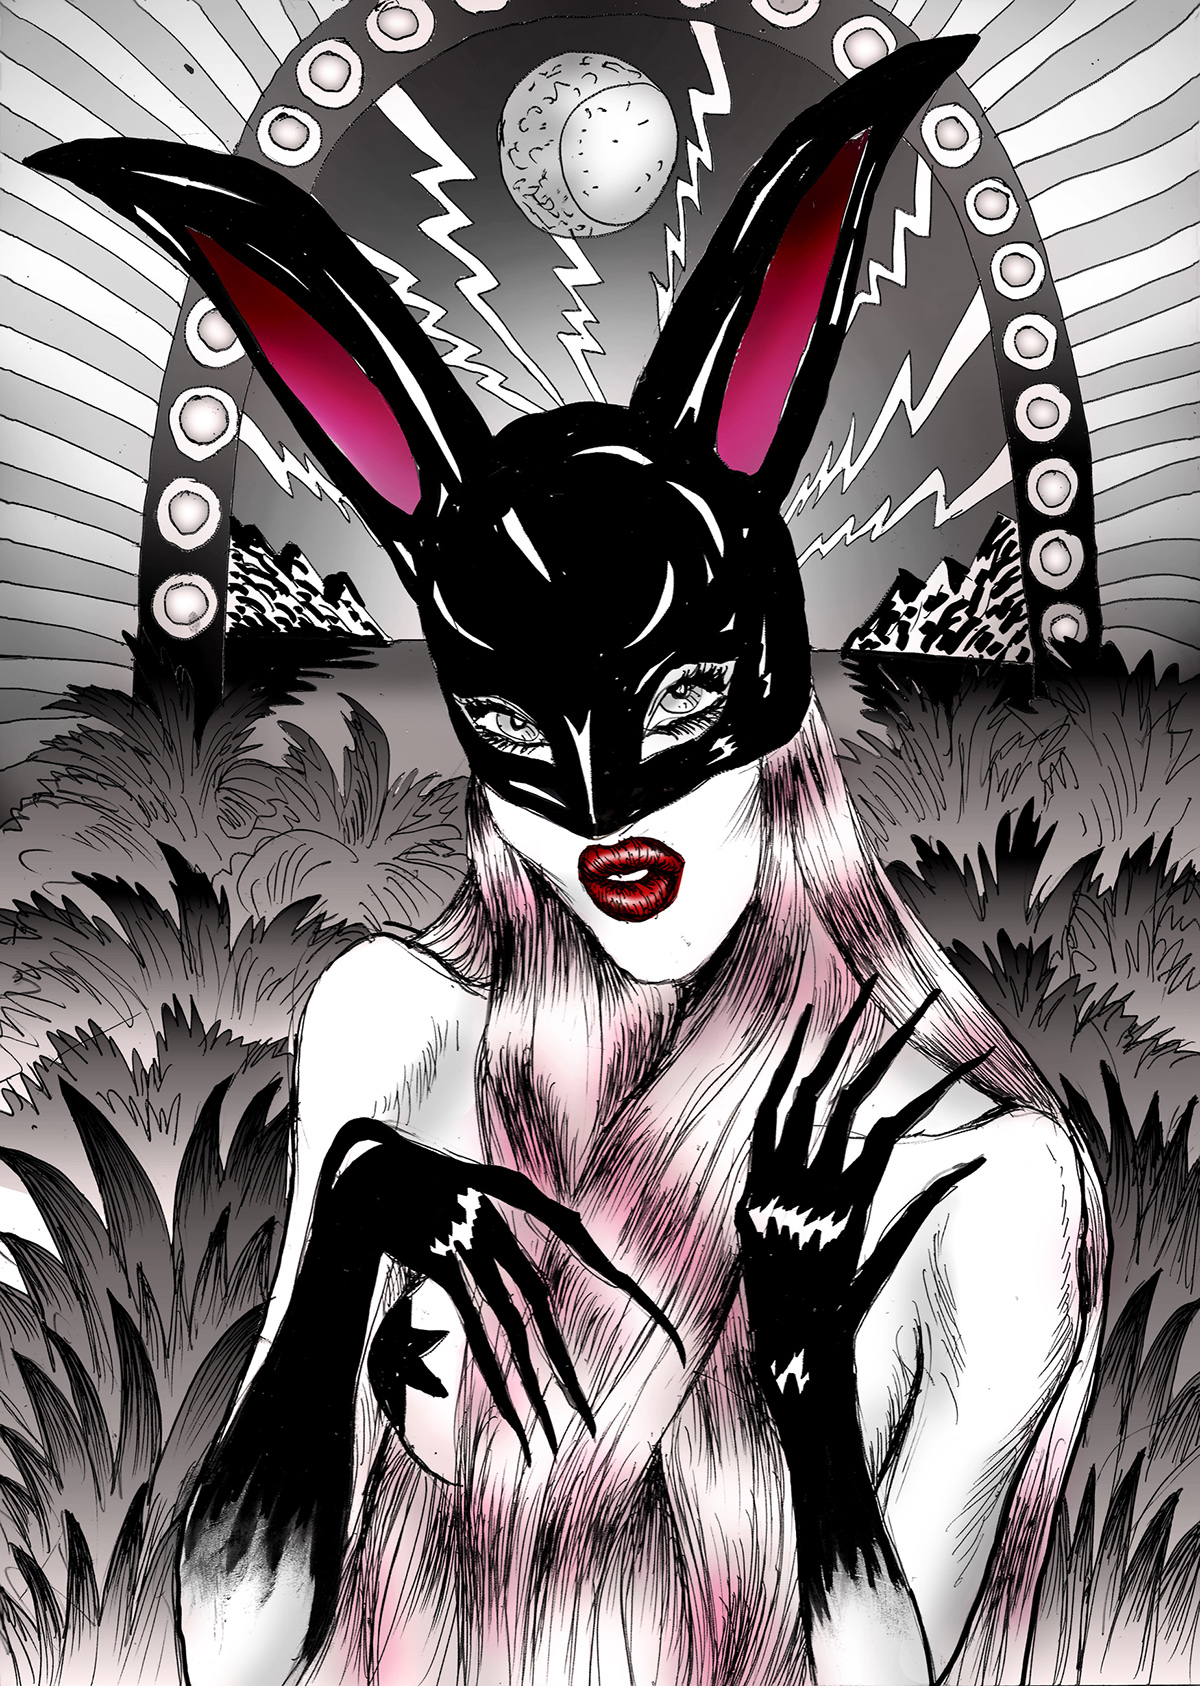 woman rabbit hare ears playmate pvc latex fetish moon pink mountains sea Lightning Bolts agave surreal